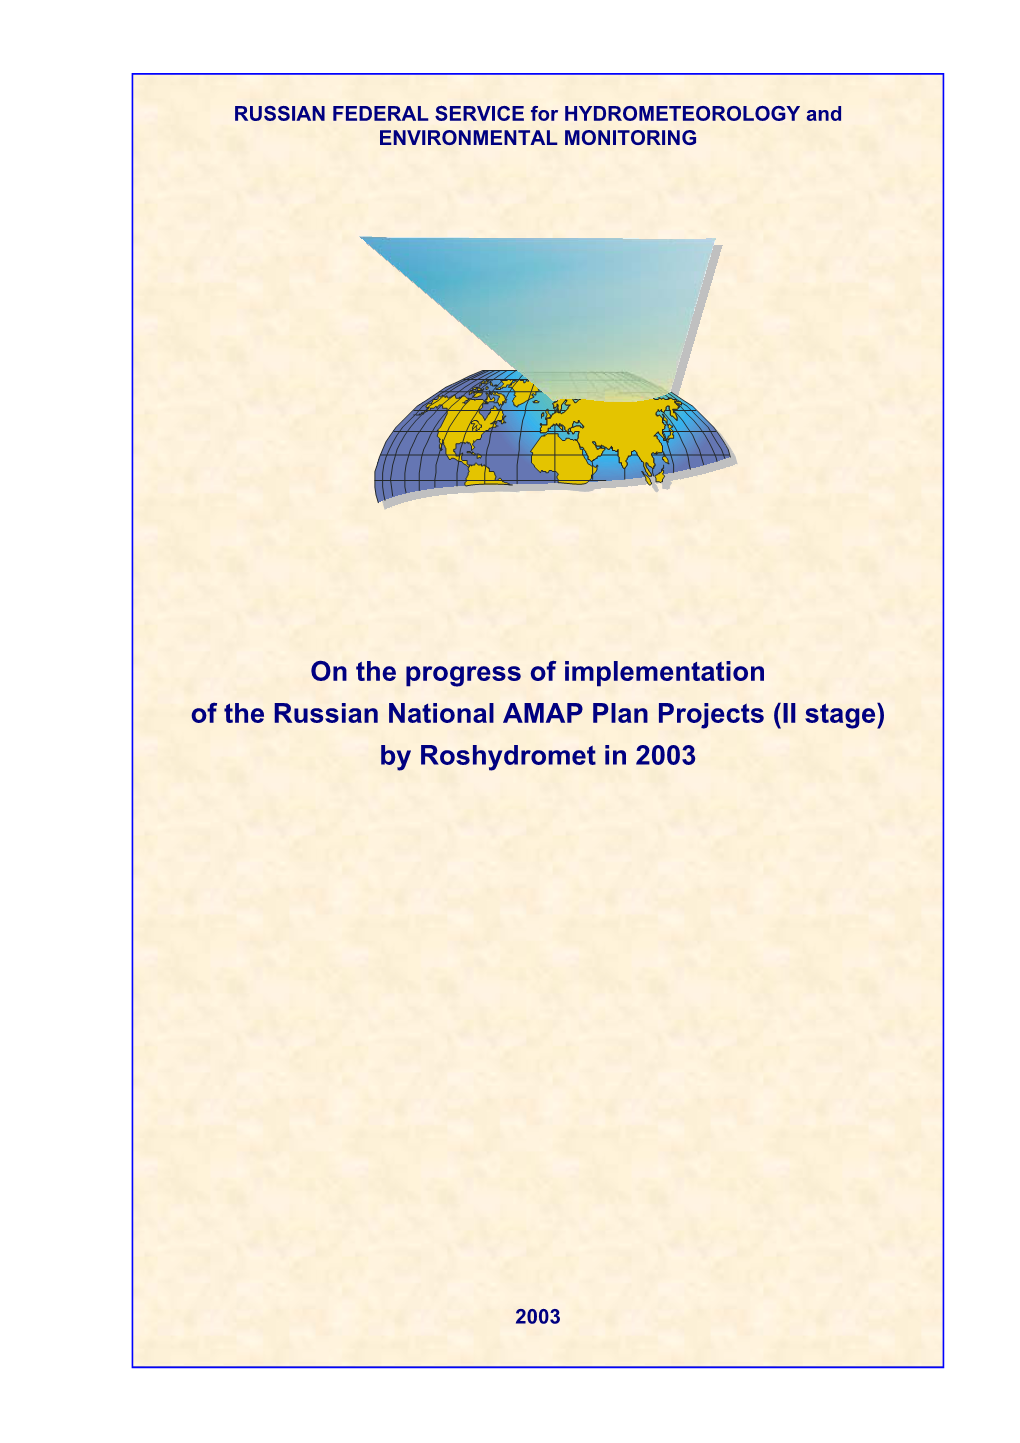 On the Progress of Implementation of the Russian National AMAP Plan Projects (II Stage) by Roshydromet in 2003